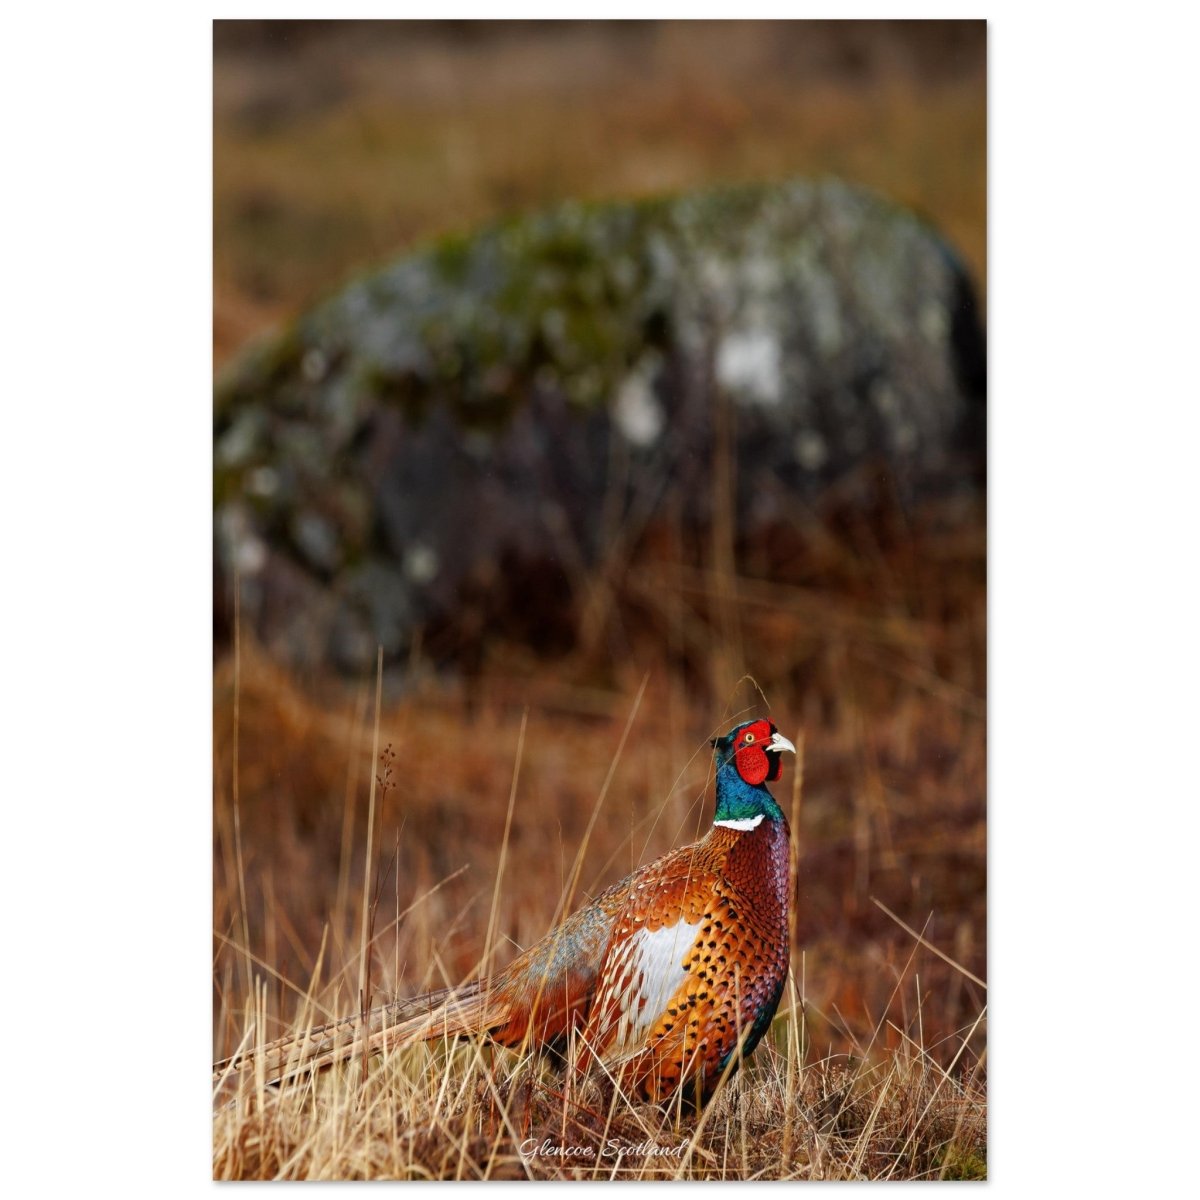 20x30 cm / 8x12″ Infamous Grouse in Glencoe by Picture This